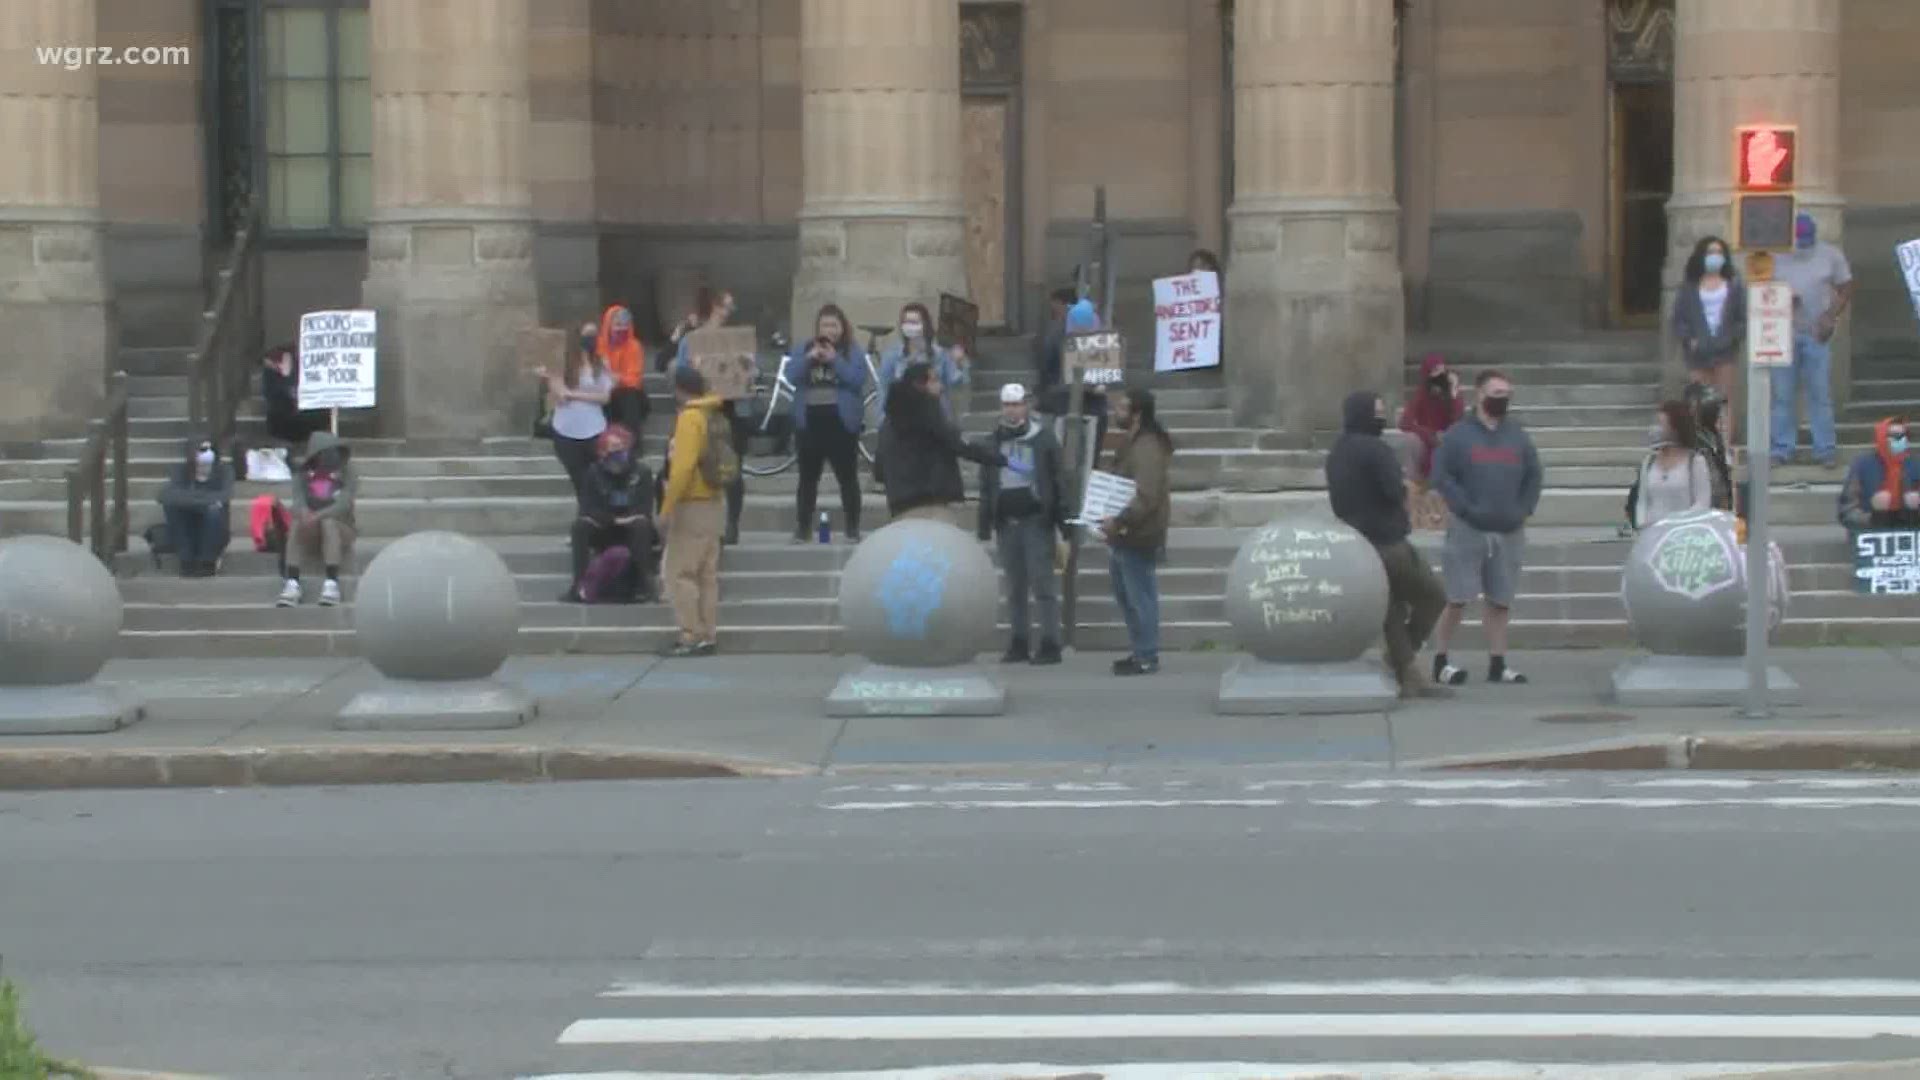 A peaceful protest was held in front of Buffalo City Hall Wednesday evening